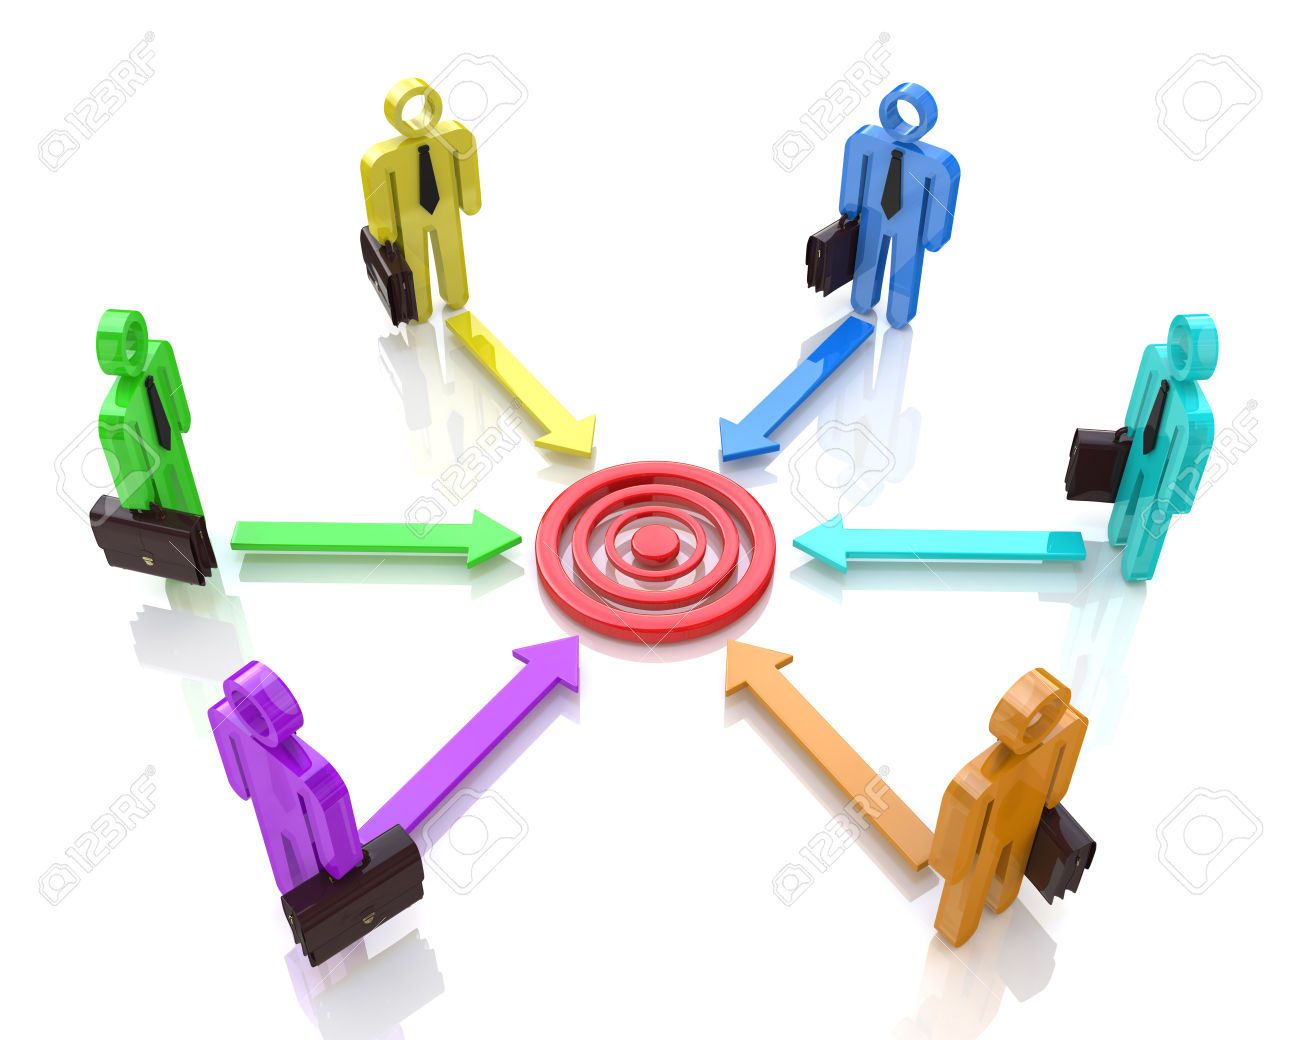 A group of competitors in a circle aiming for the same goal in the design of information related to the business motivation